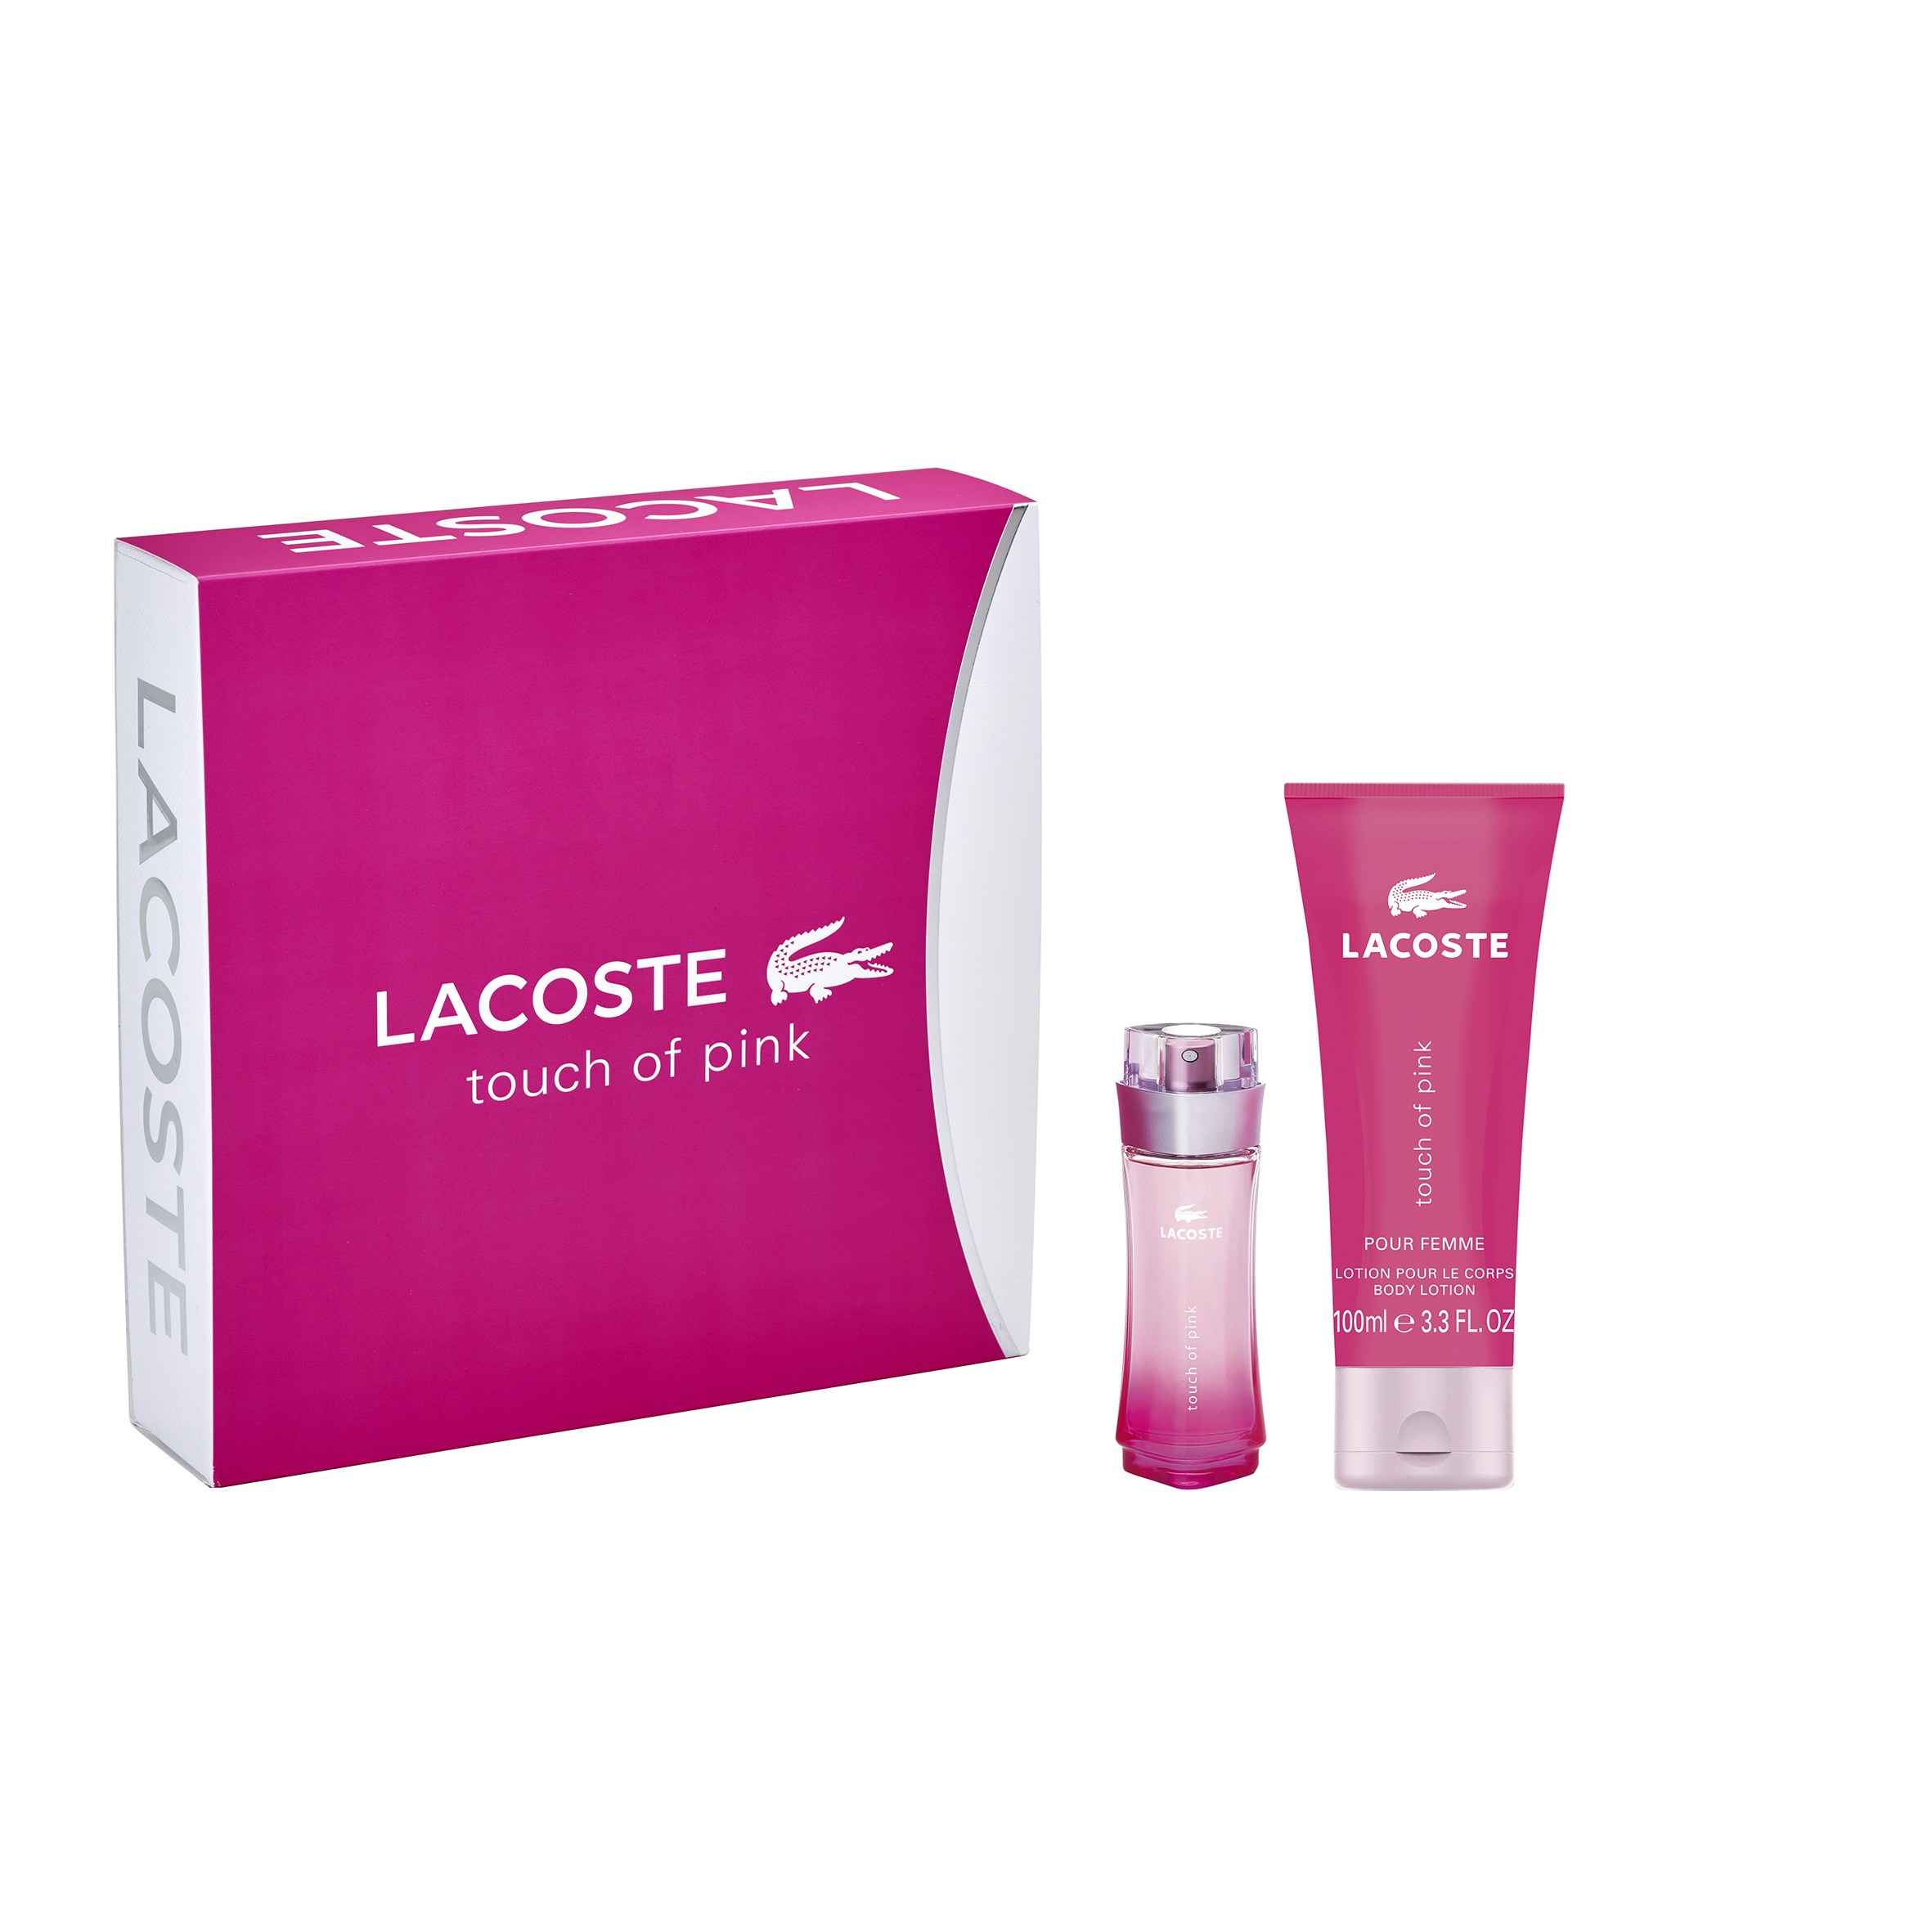 pink lacoste perfume gift set